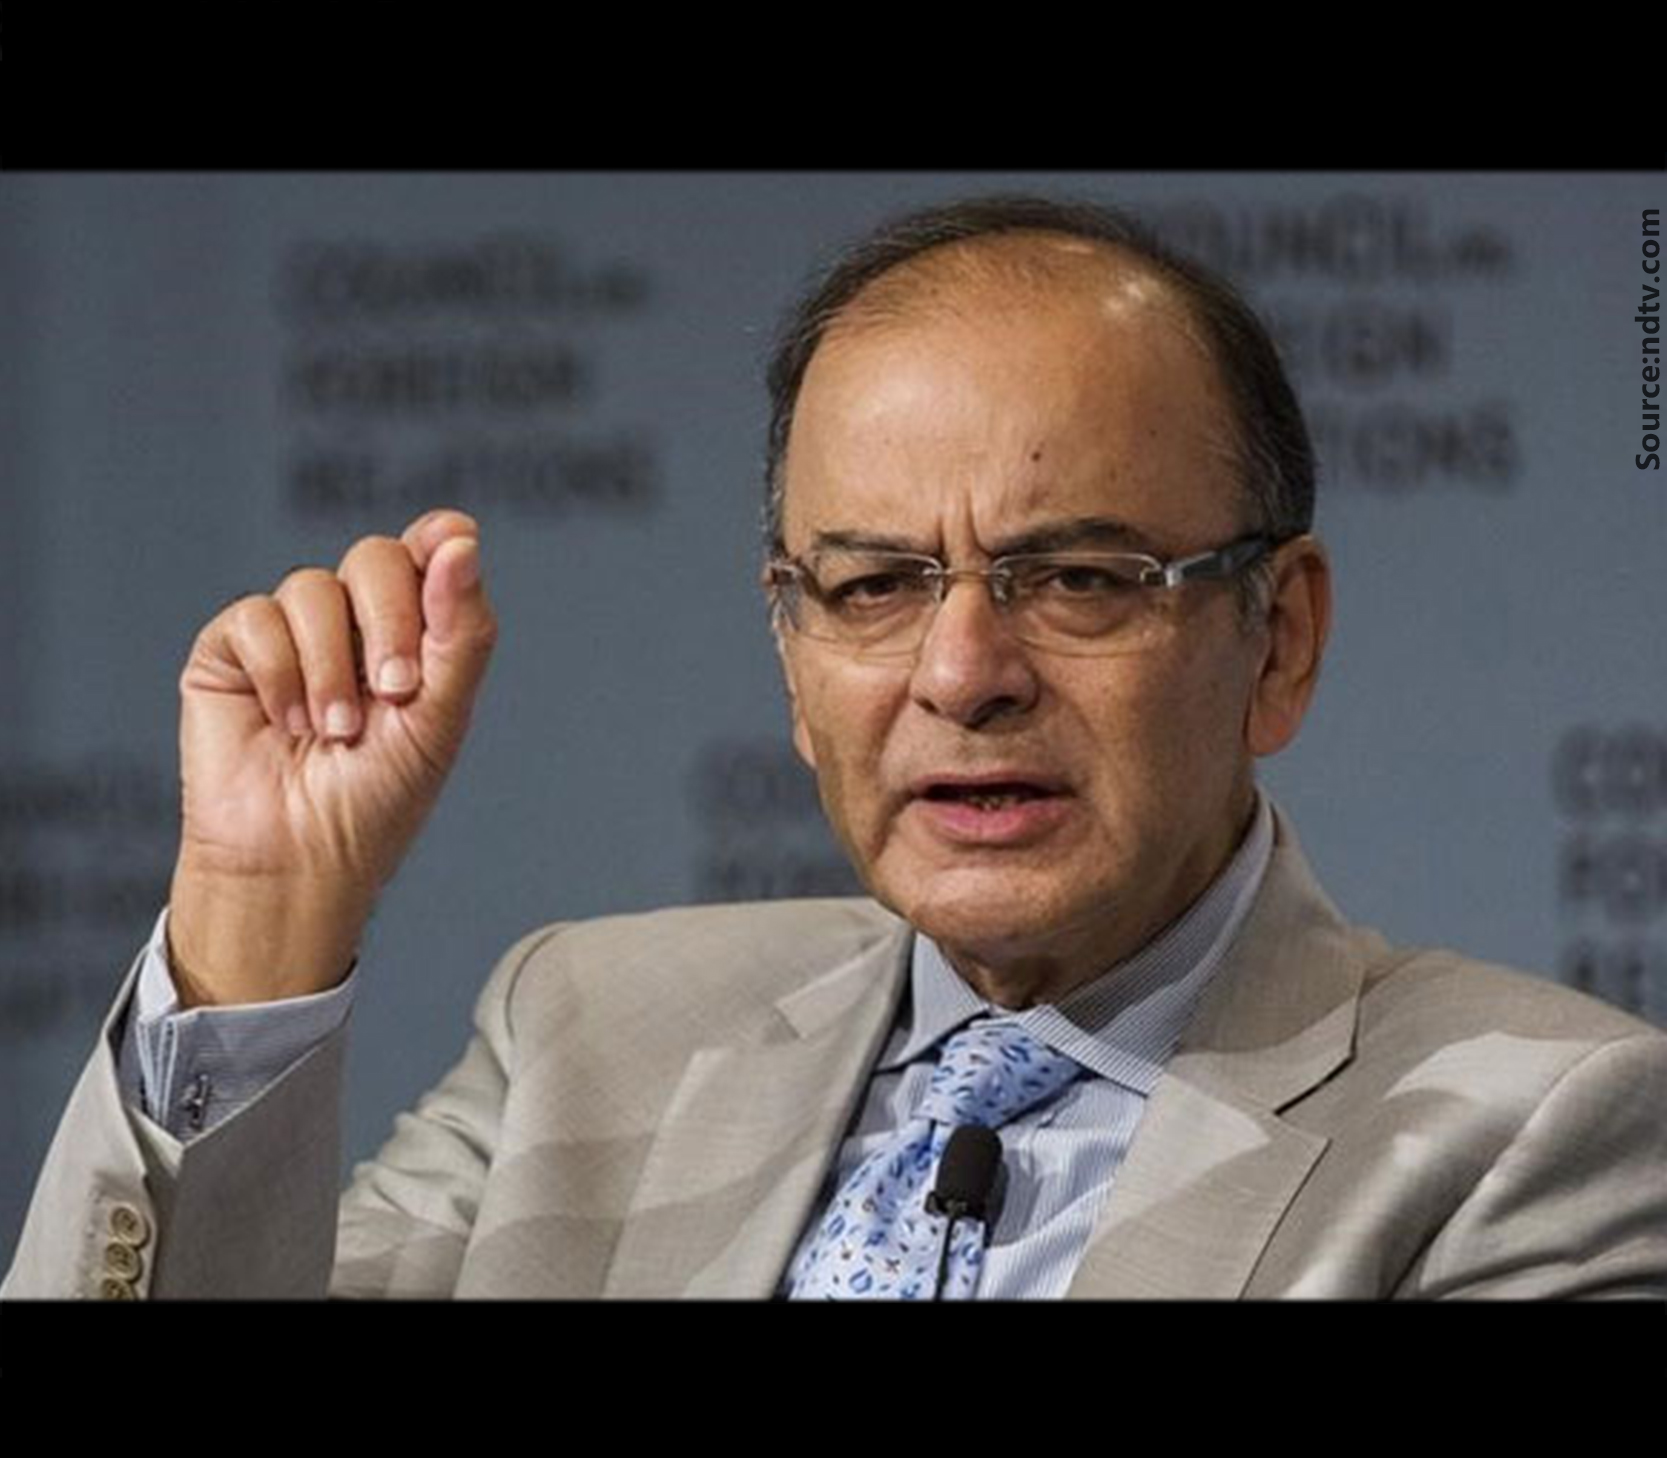 Creditors need to take haircut in resolving bankruptcy: Jaitley